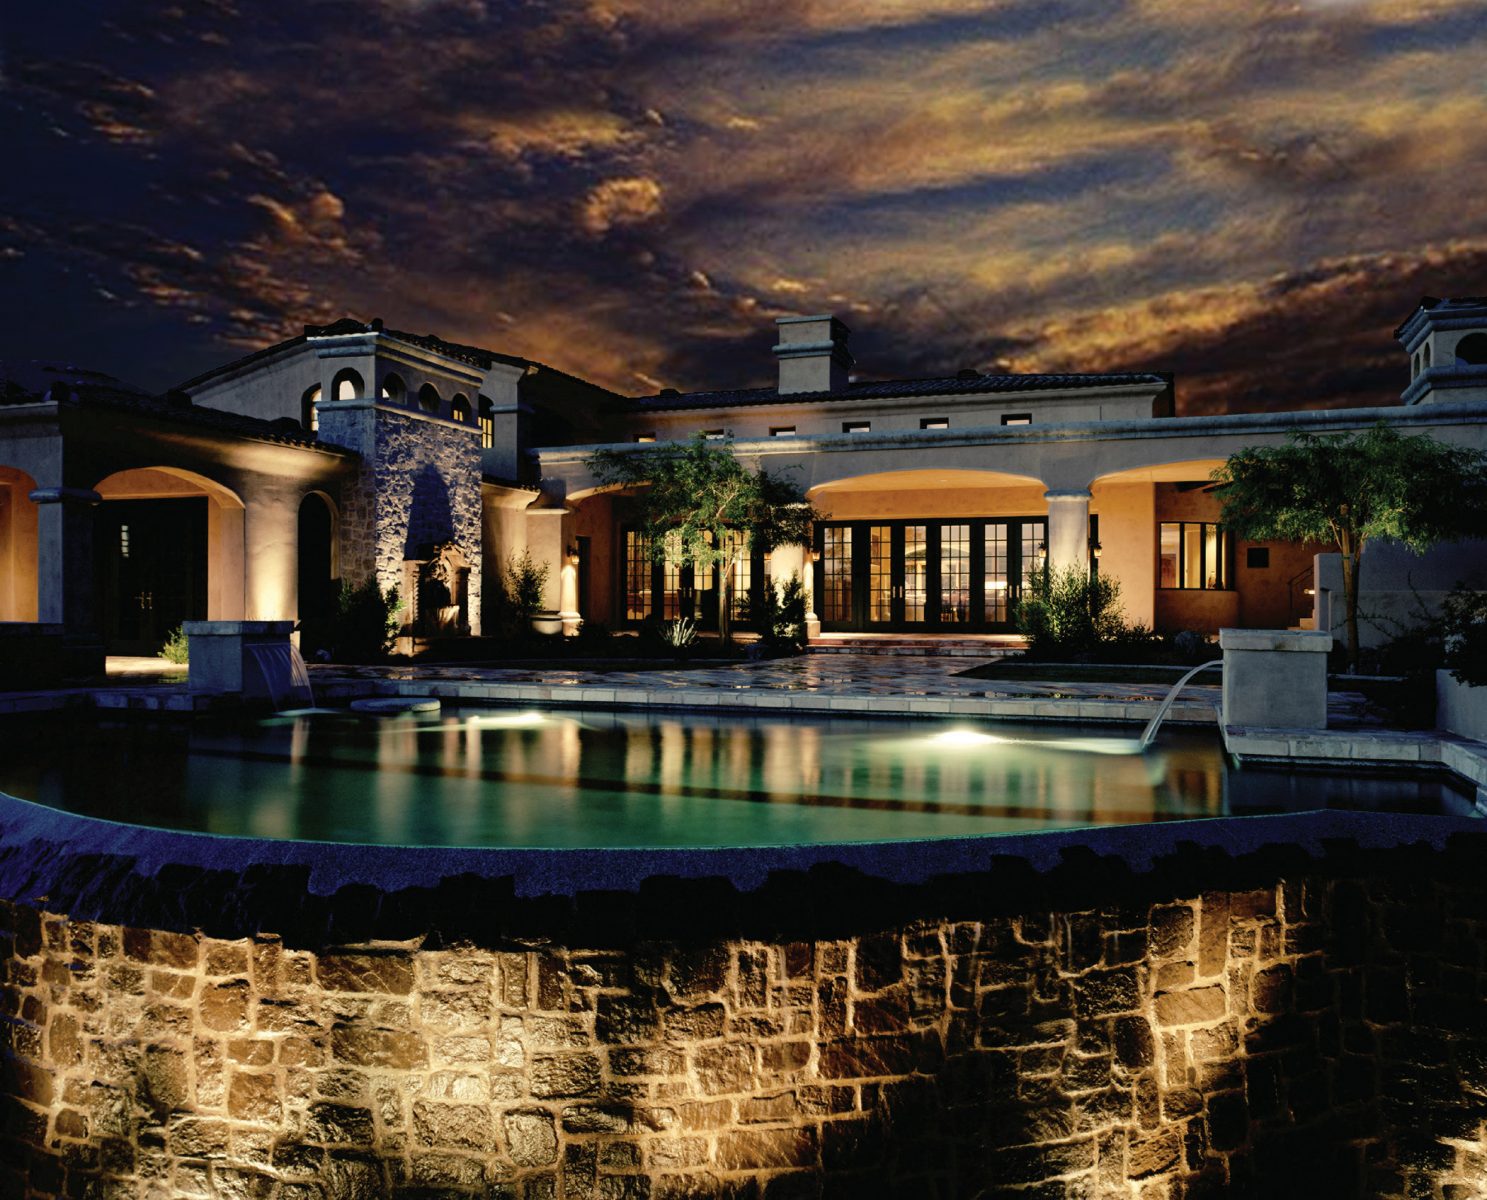 Large home - outdoor lighting near pool at sunset